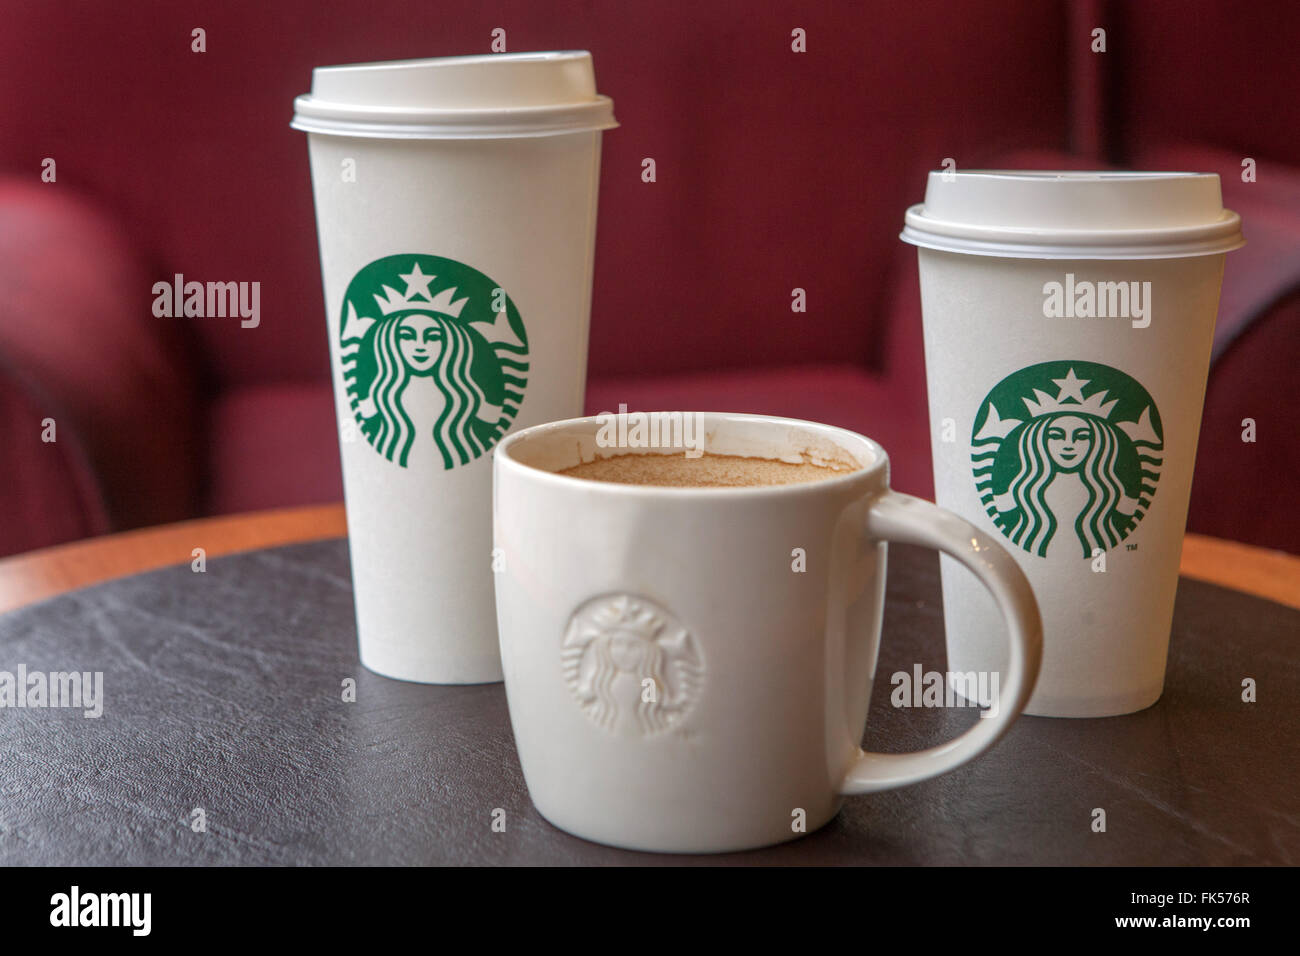 Starbucks coffee cups on a table Stock Photo